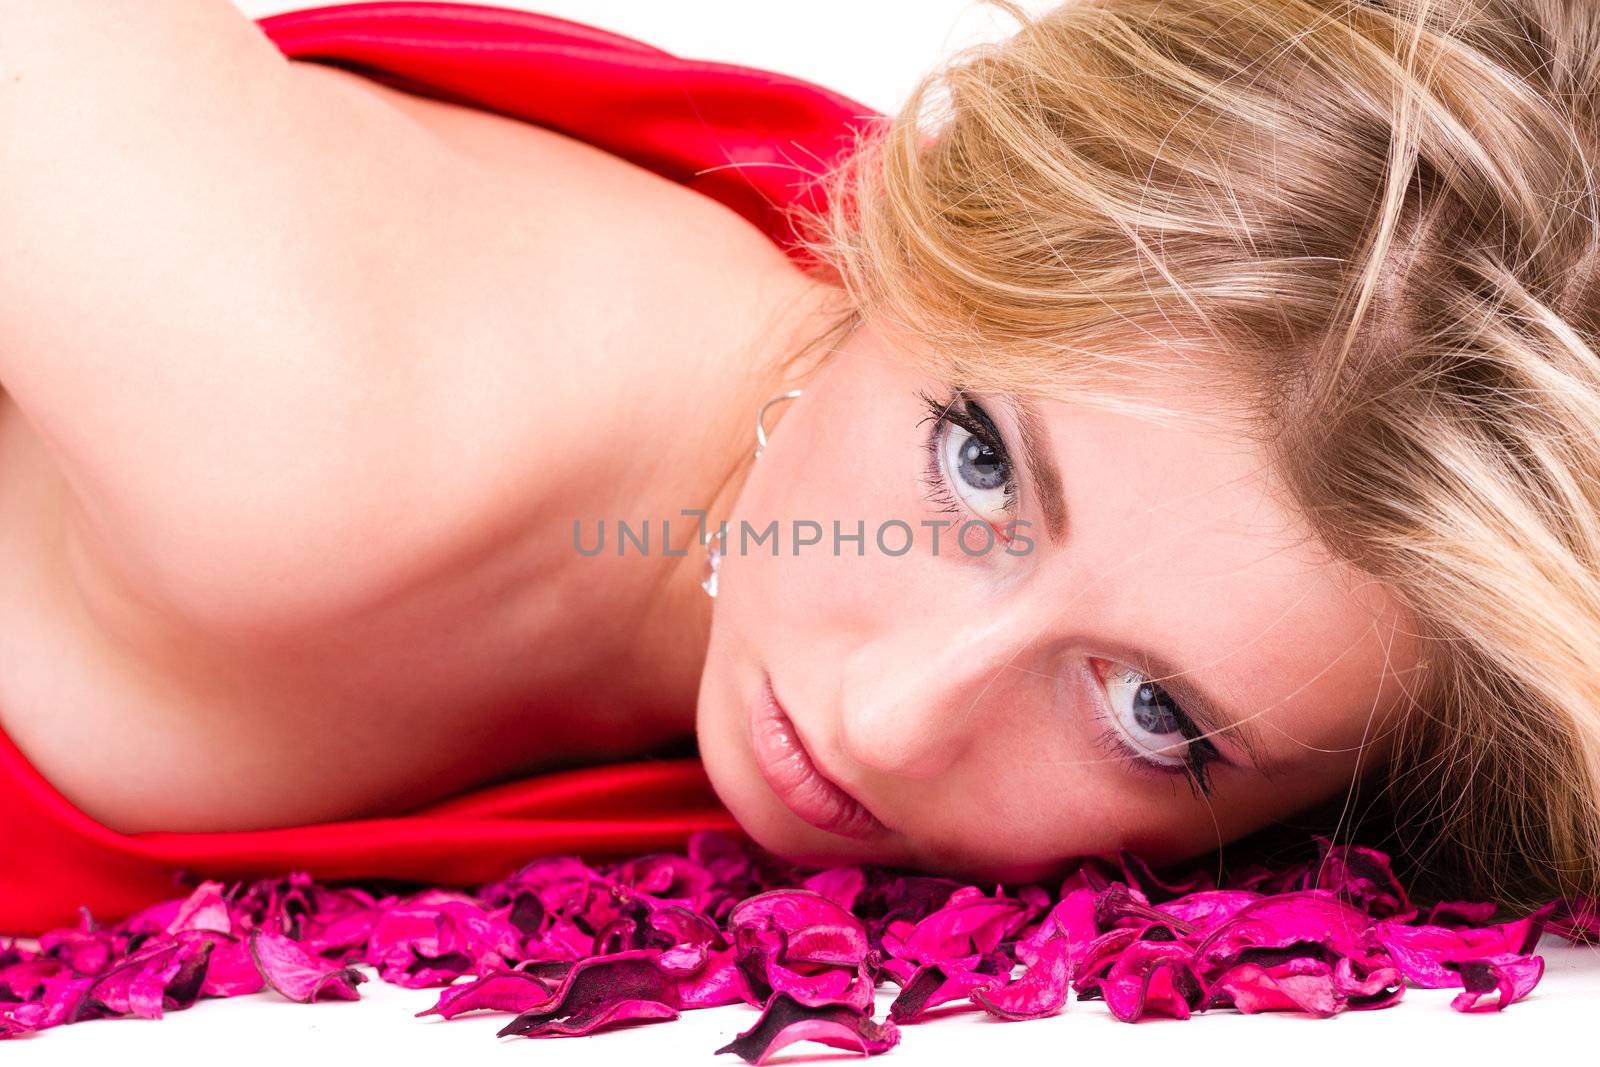 sexy woman in red dress with rose petals by stepanov